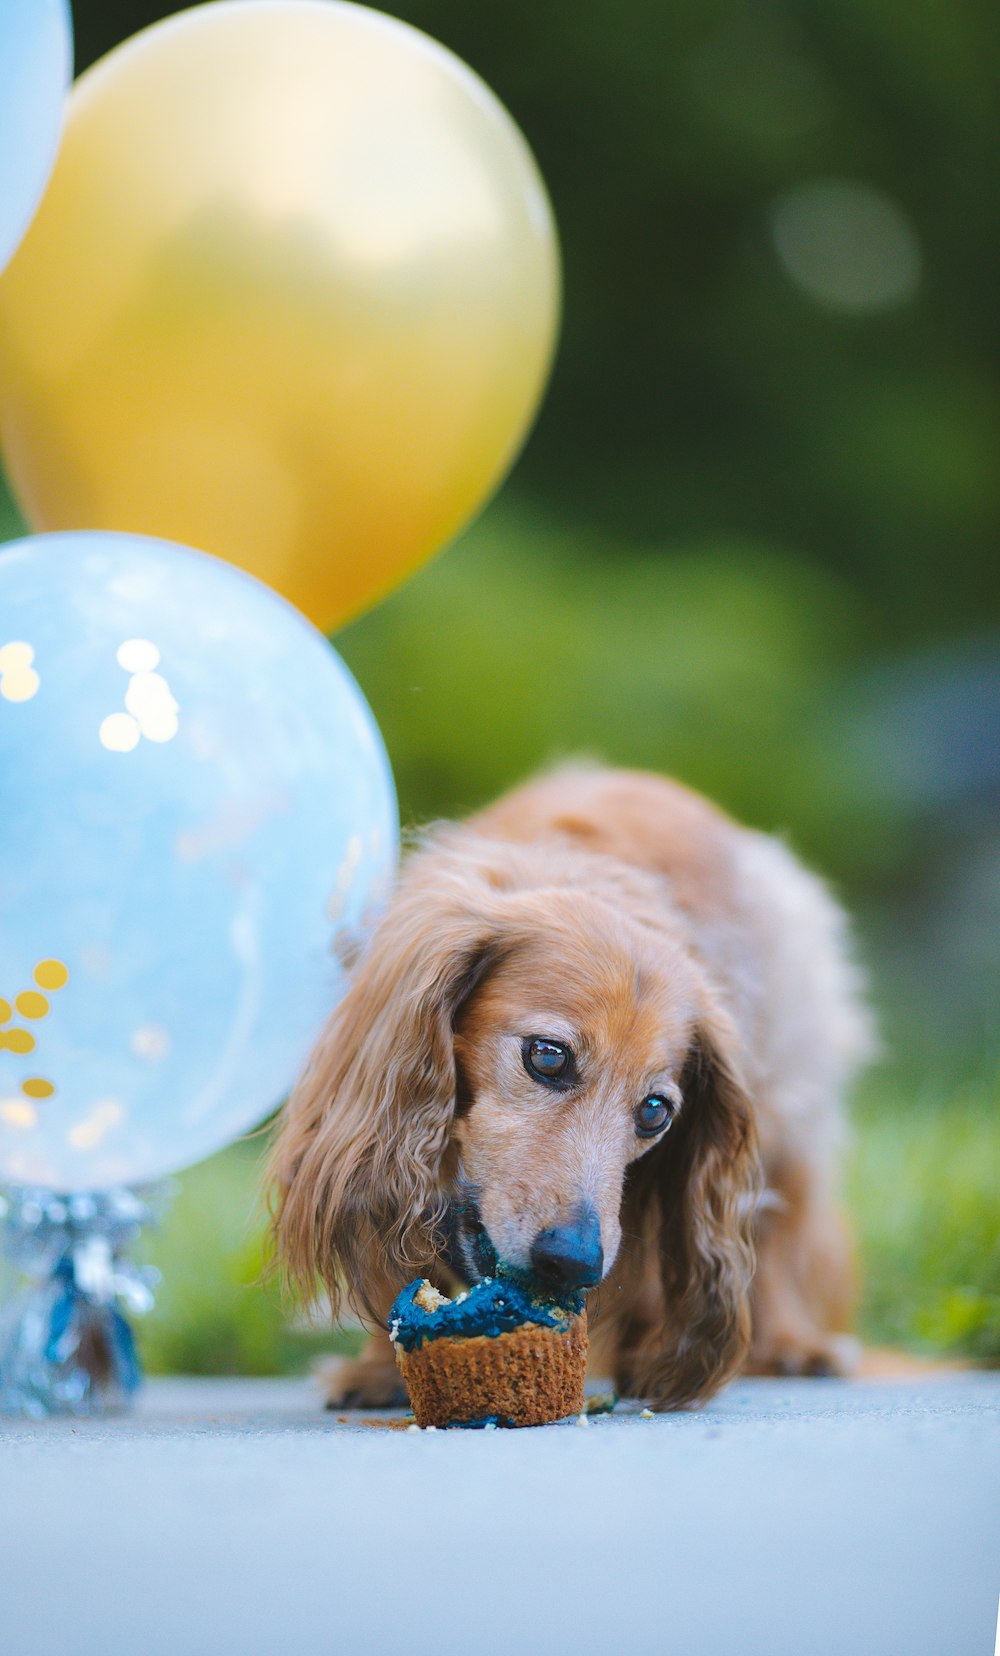 a brown dog chewing on a toy in front of balloons